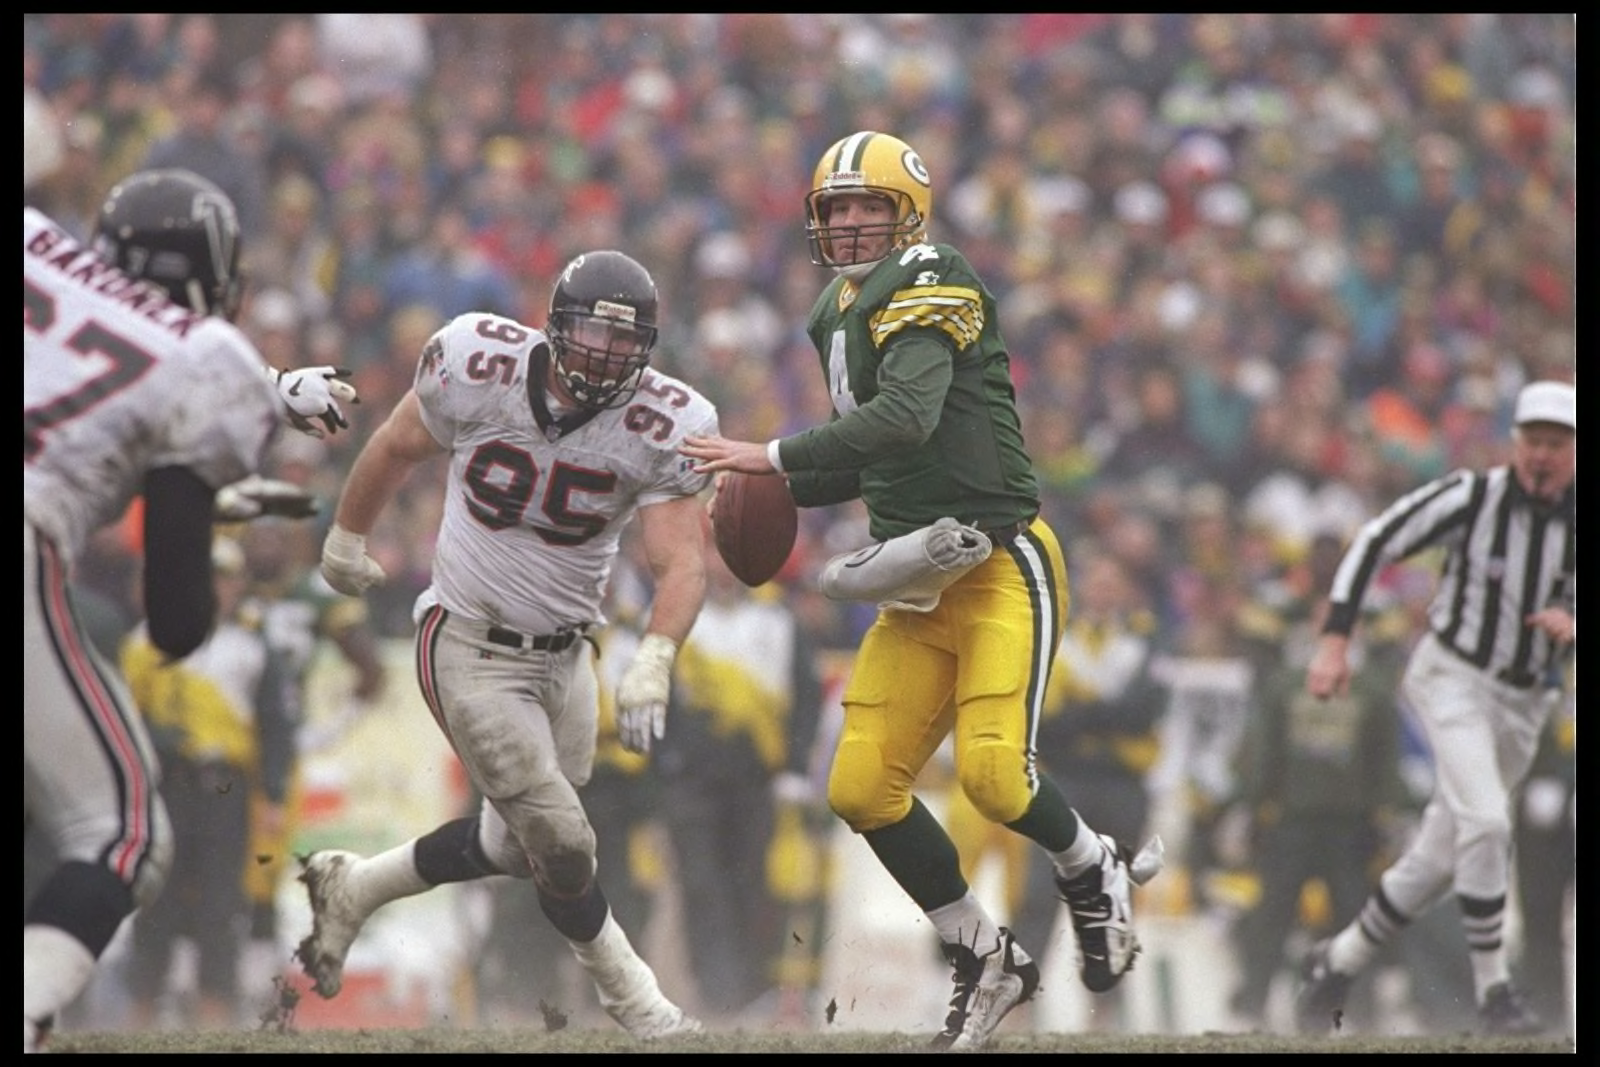 1995 green bay packers